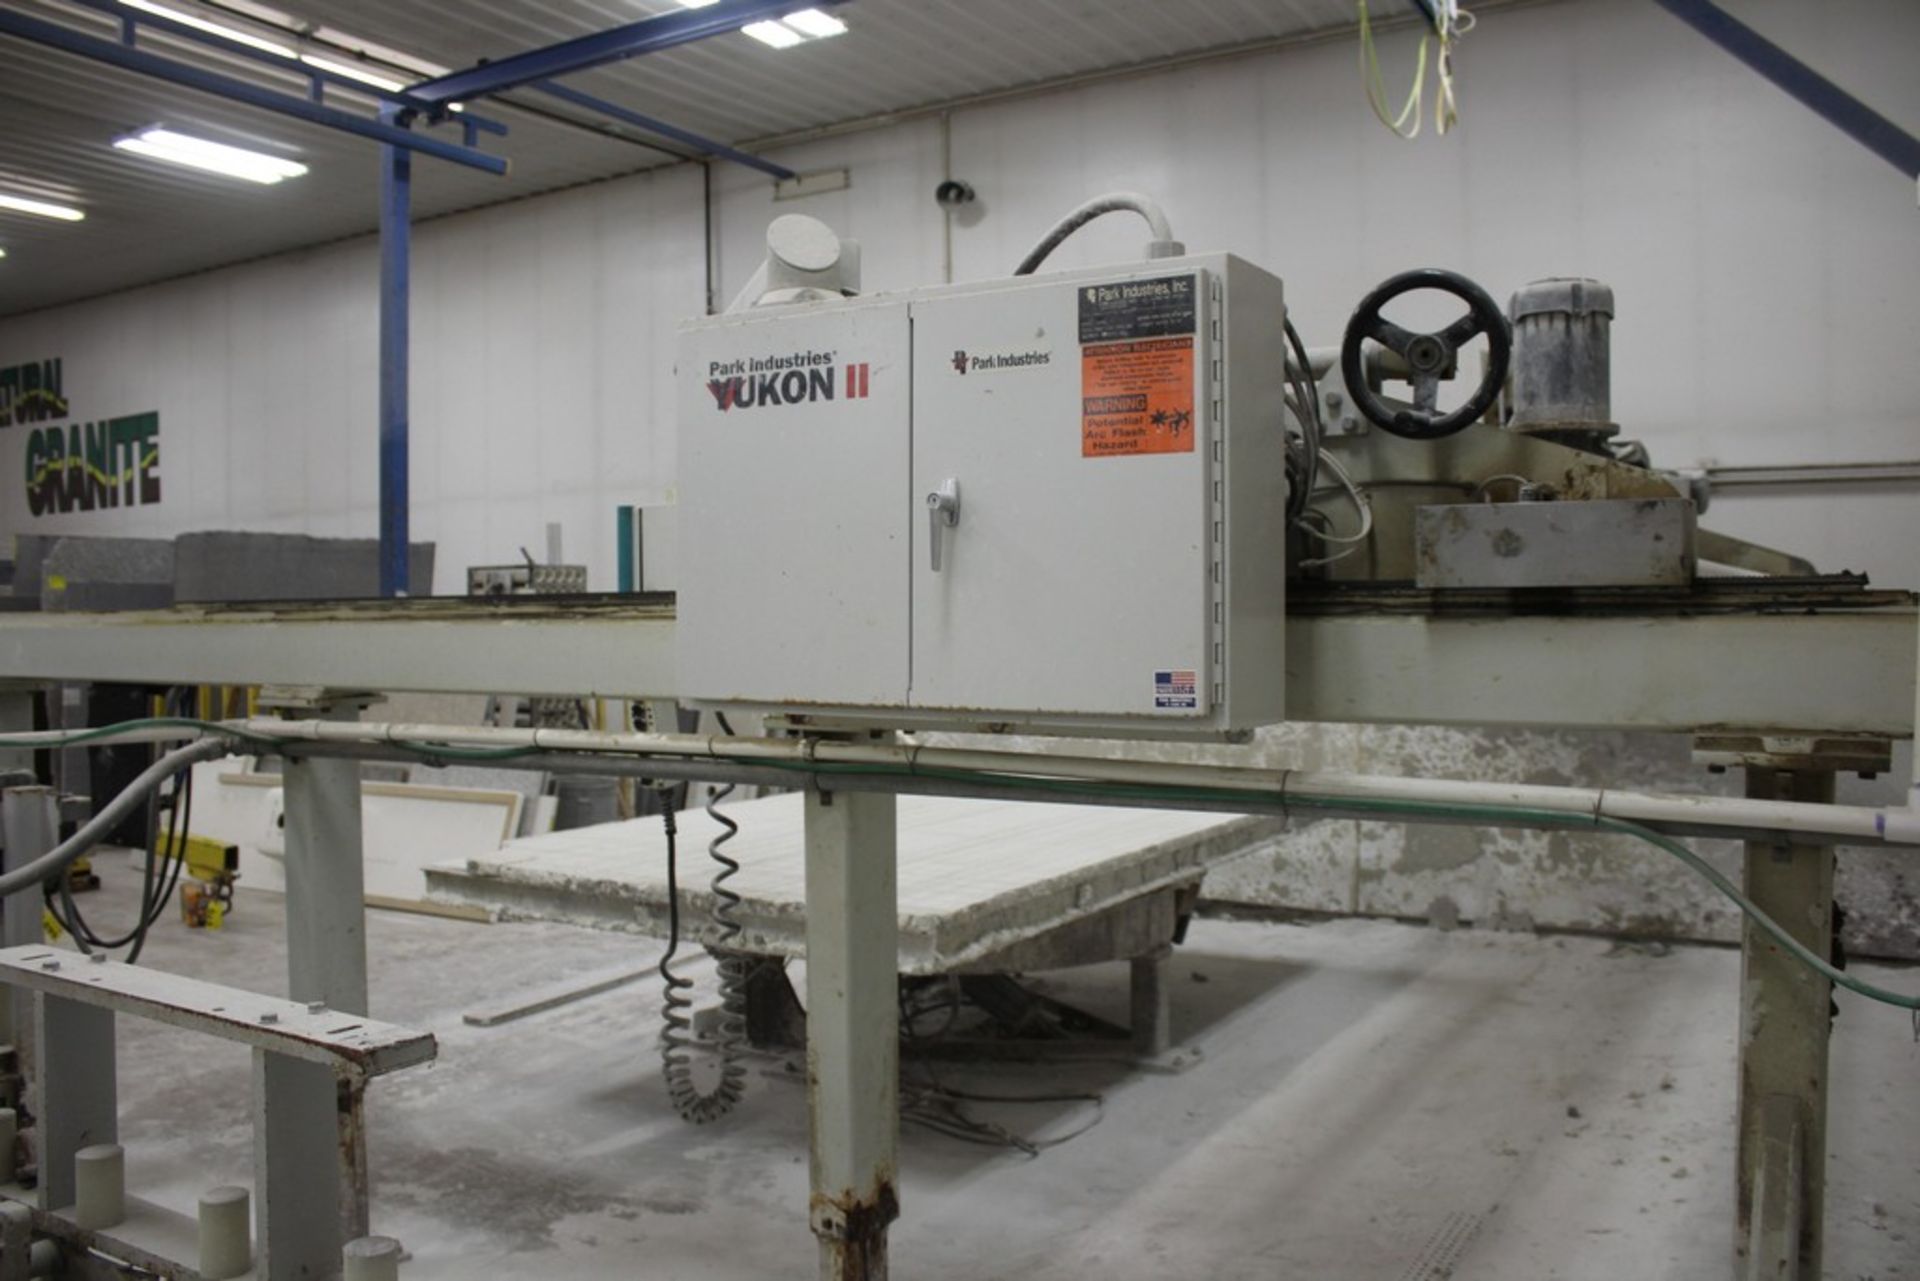 PARK INDUSTRIES MODEL YUKON II BRIDGE SAW WITH ROTATING TABLE (11' X 6' X 33" H) WITH SIEMENS - Image 24 of 36